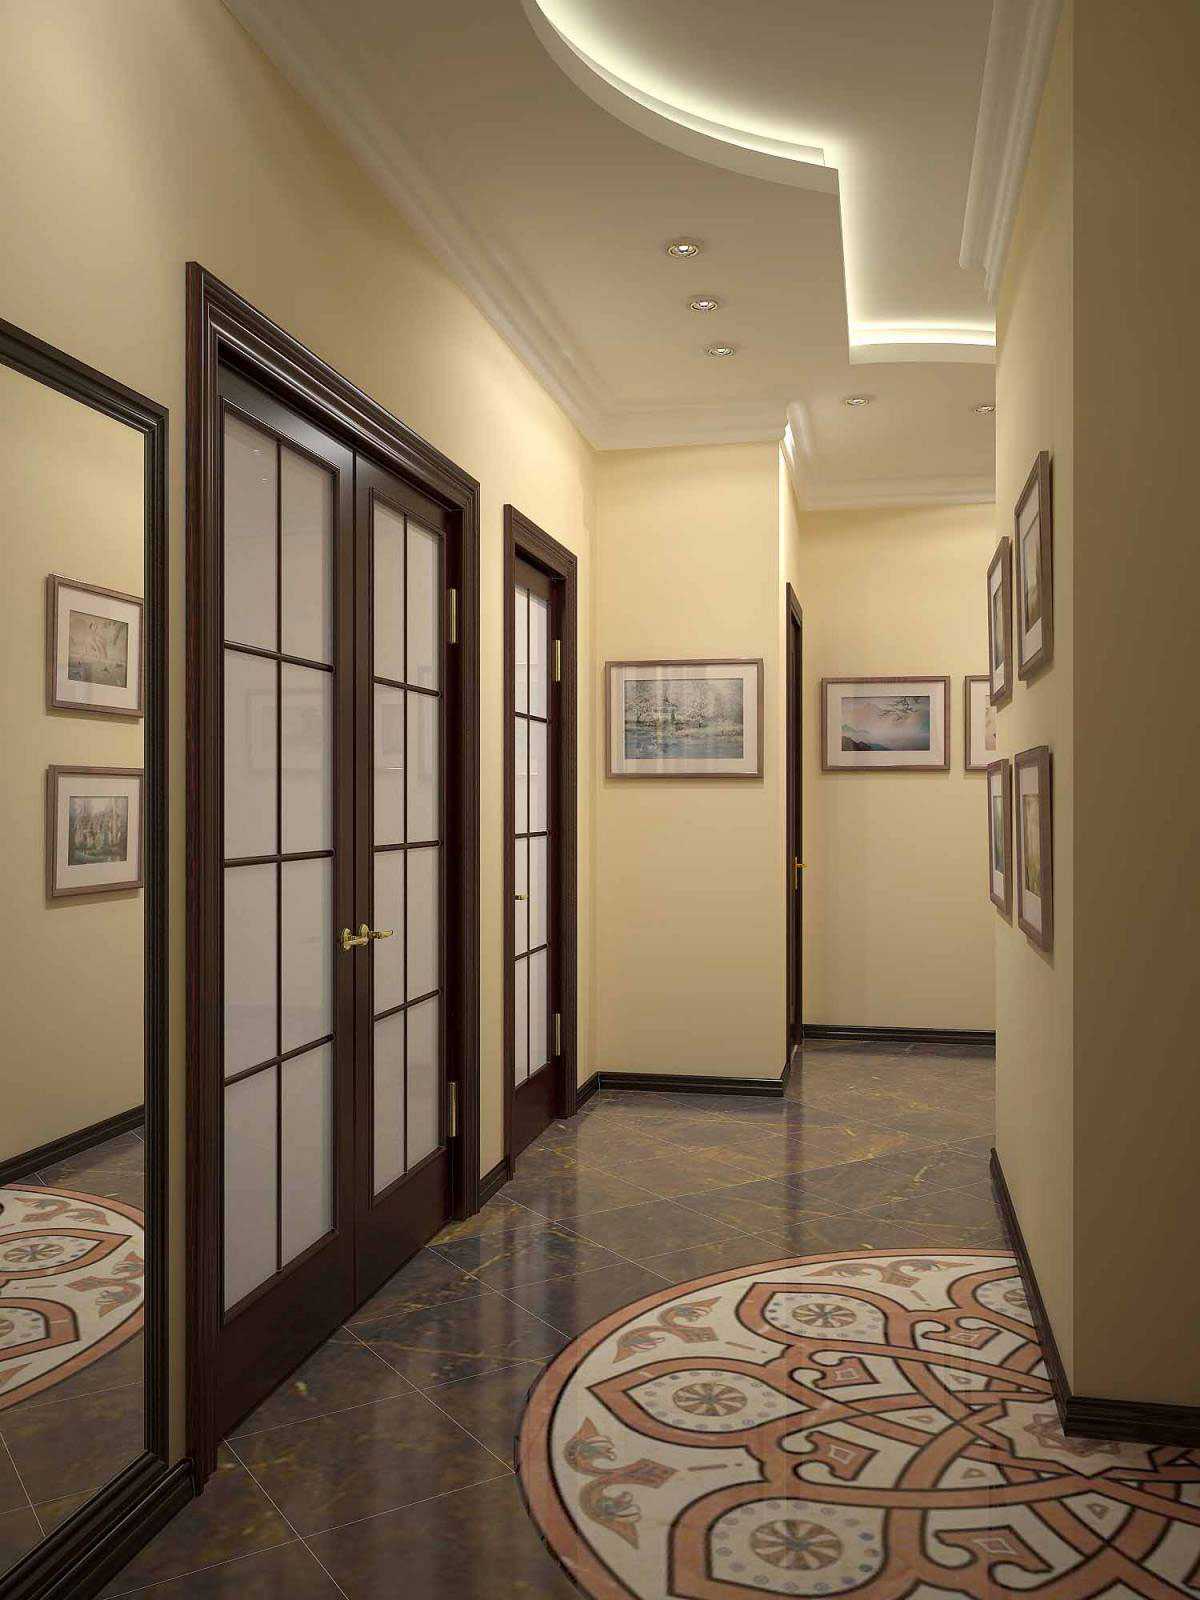 version of the original style of the hallway